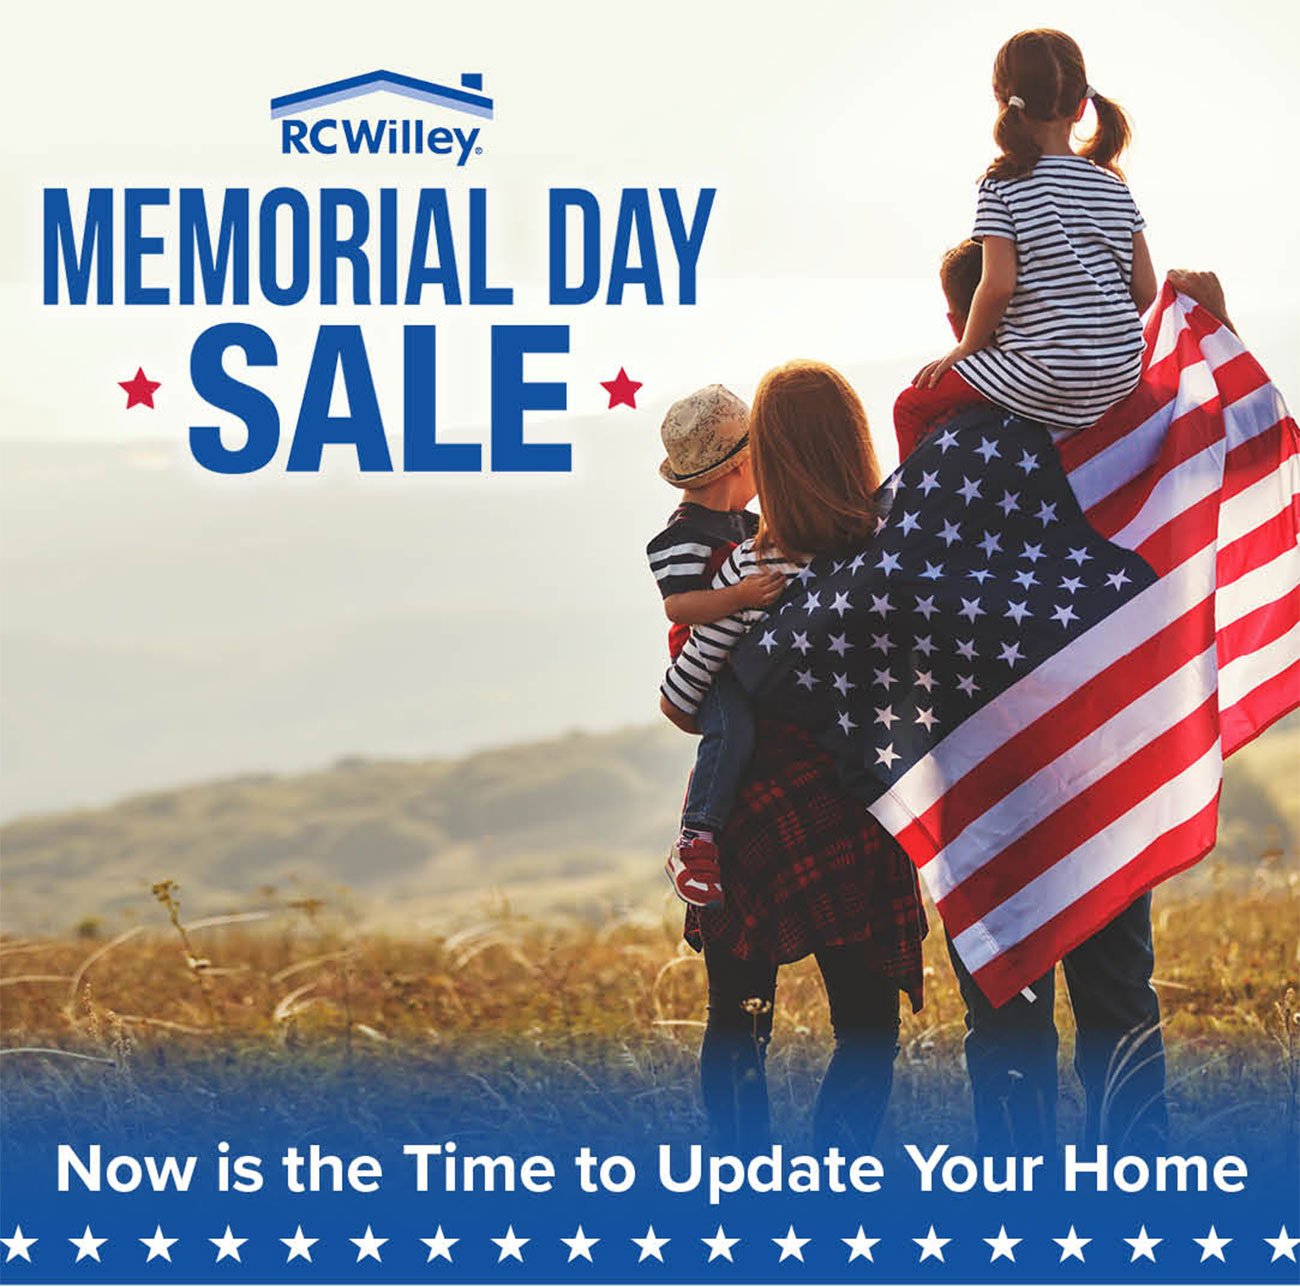 Expired Email Memorial Day Sale Starts Now! RC Willey